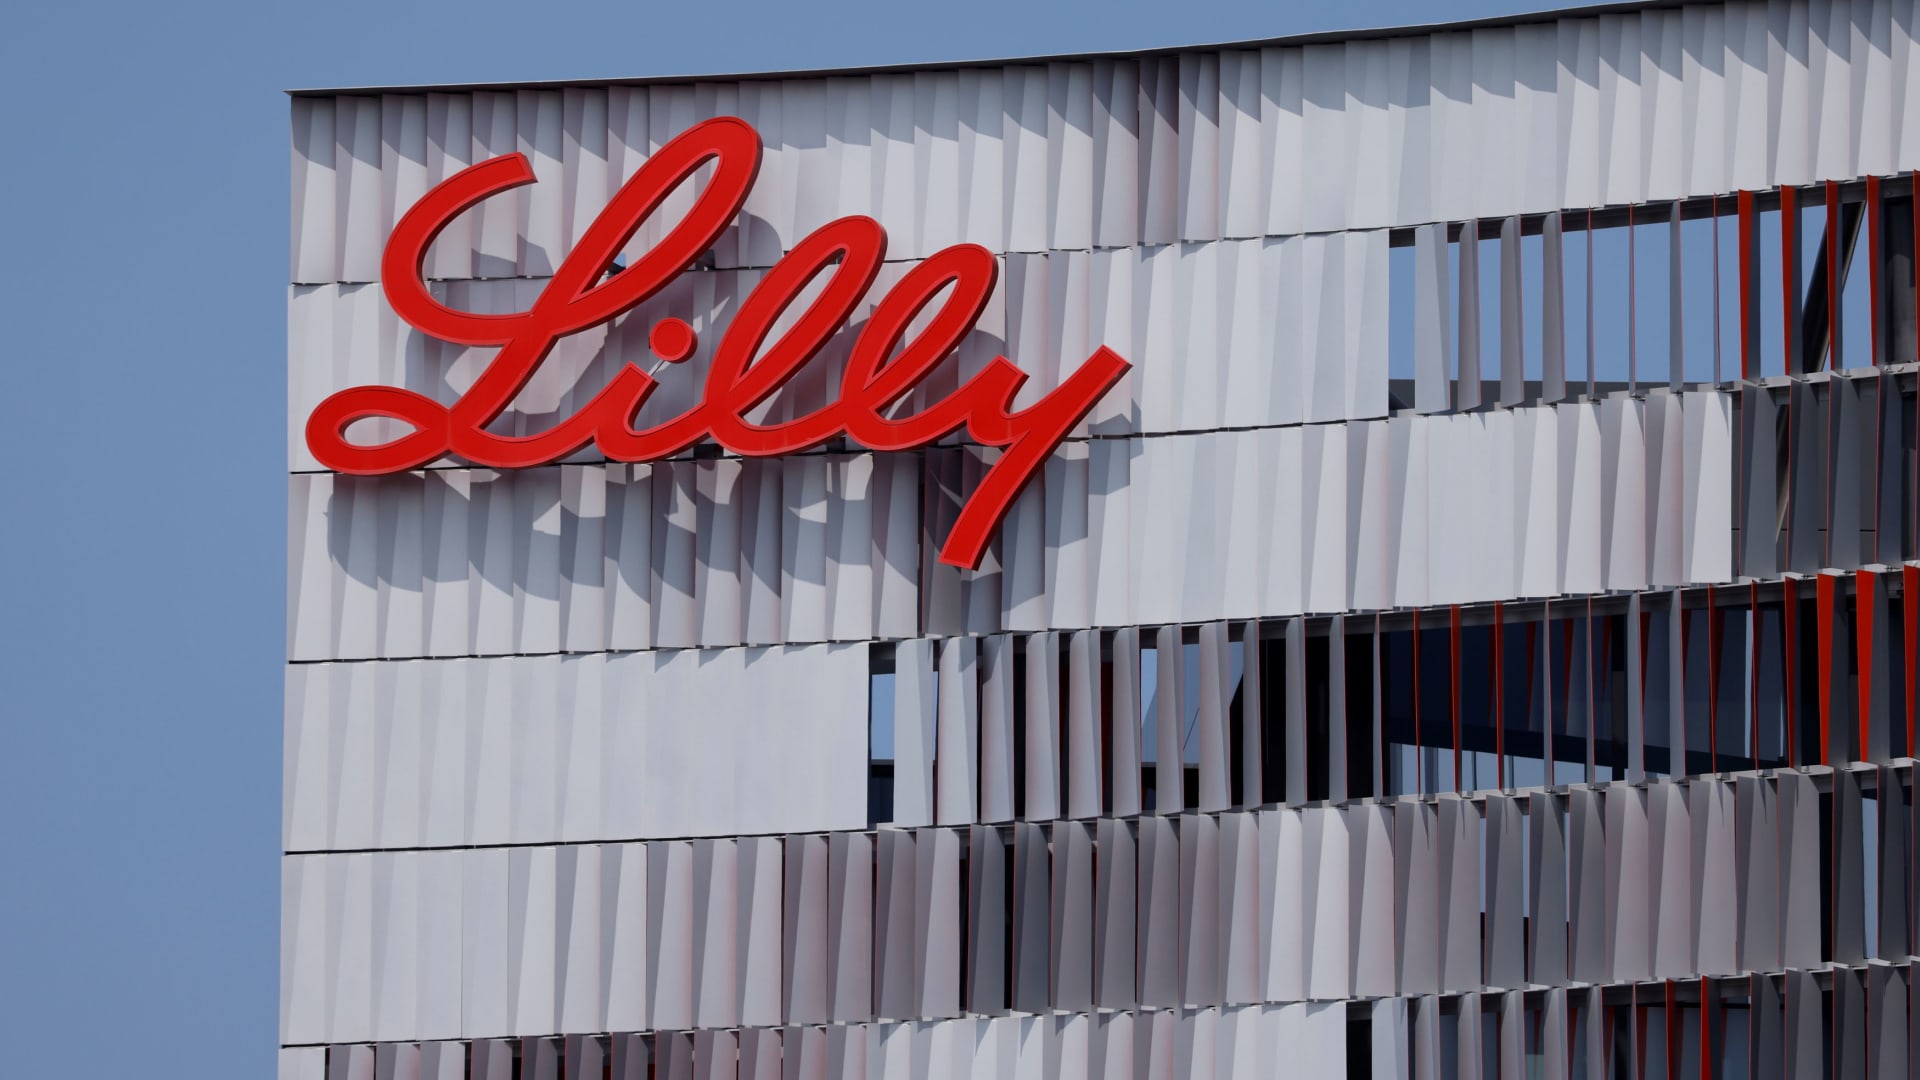 Eli Lilly's 'game-changing' diabetes drug could boost the stock, SVB Securities says